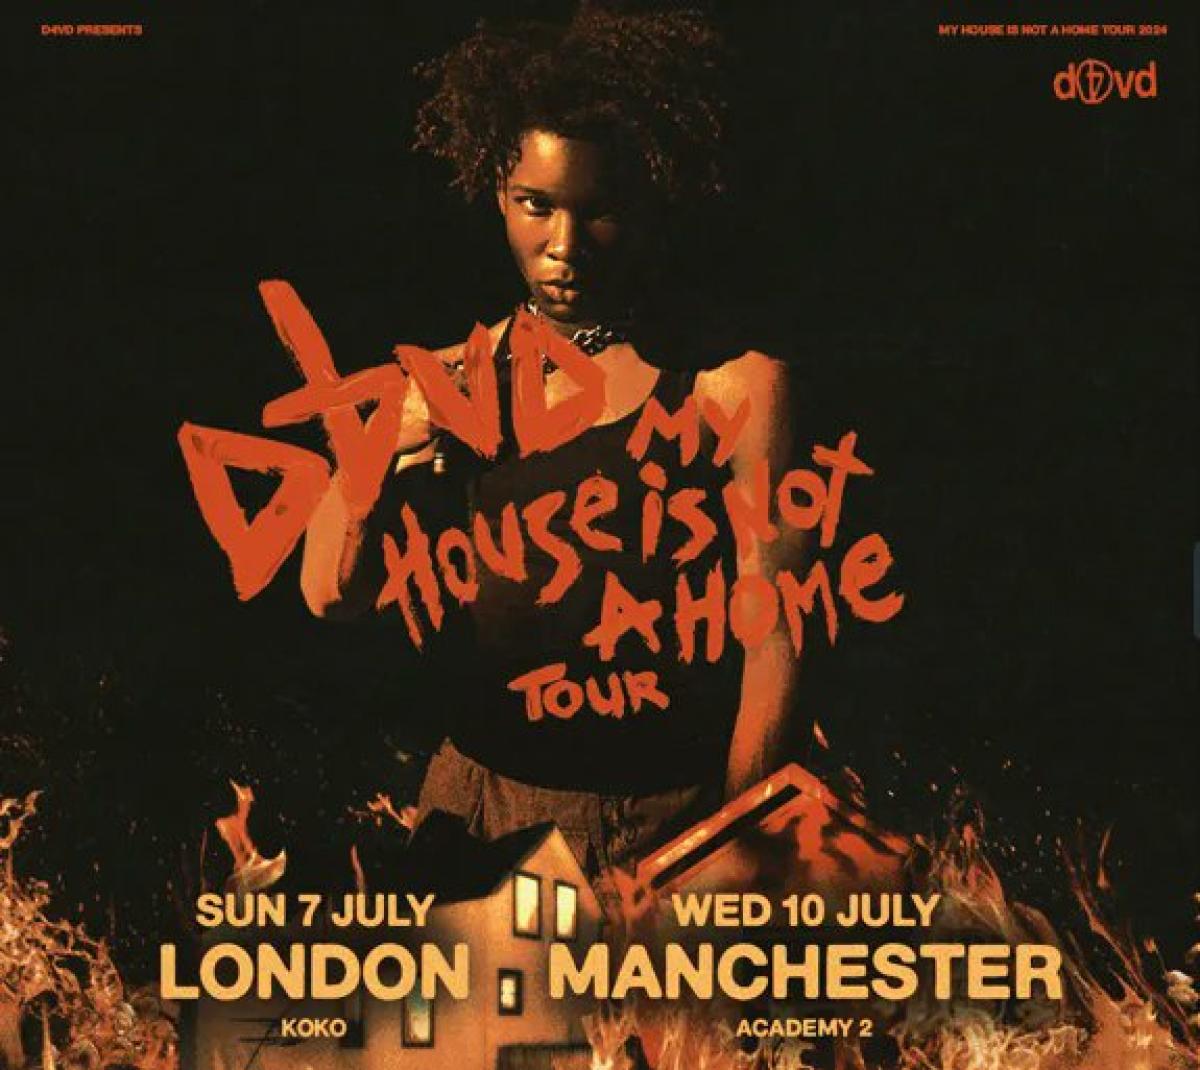 D4vd - My House Is Not A Home Tour al Manchester Academy Tickets